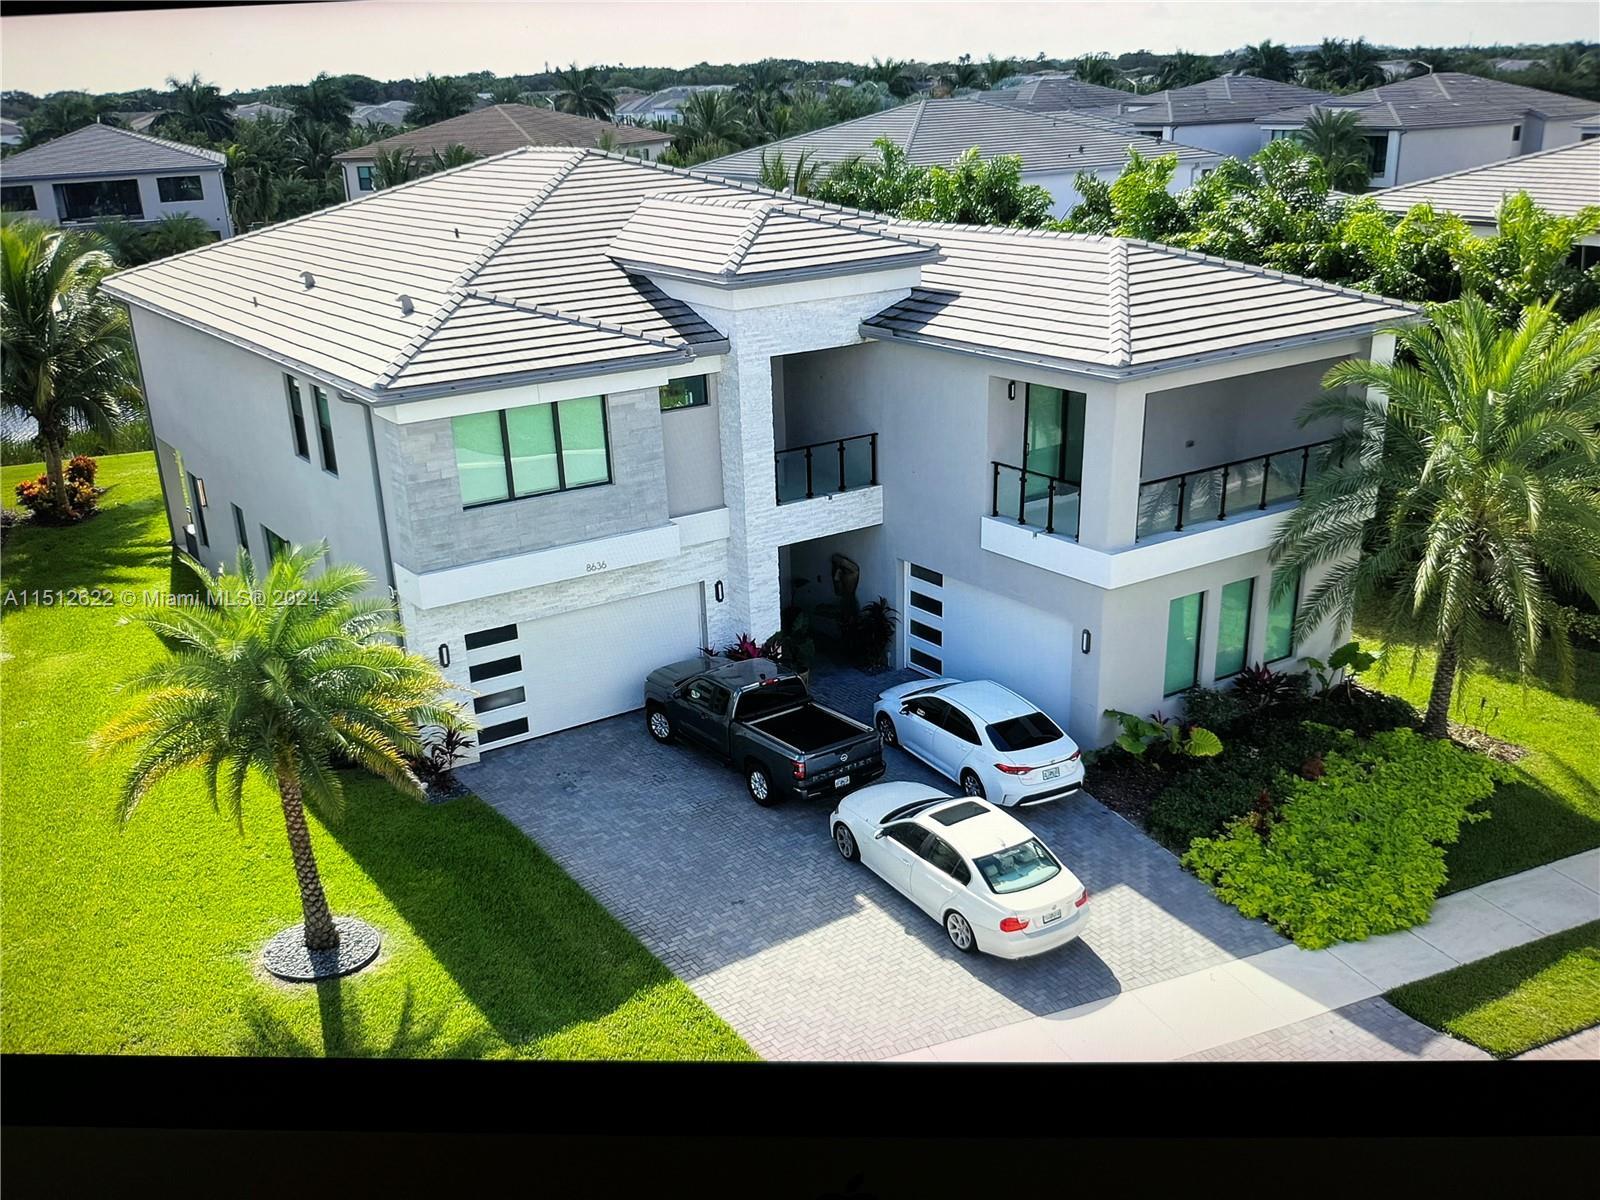 Welcome to your dream home!!!
Introducing Lotus, contemporary design redefine luxury living in Boca